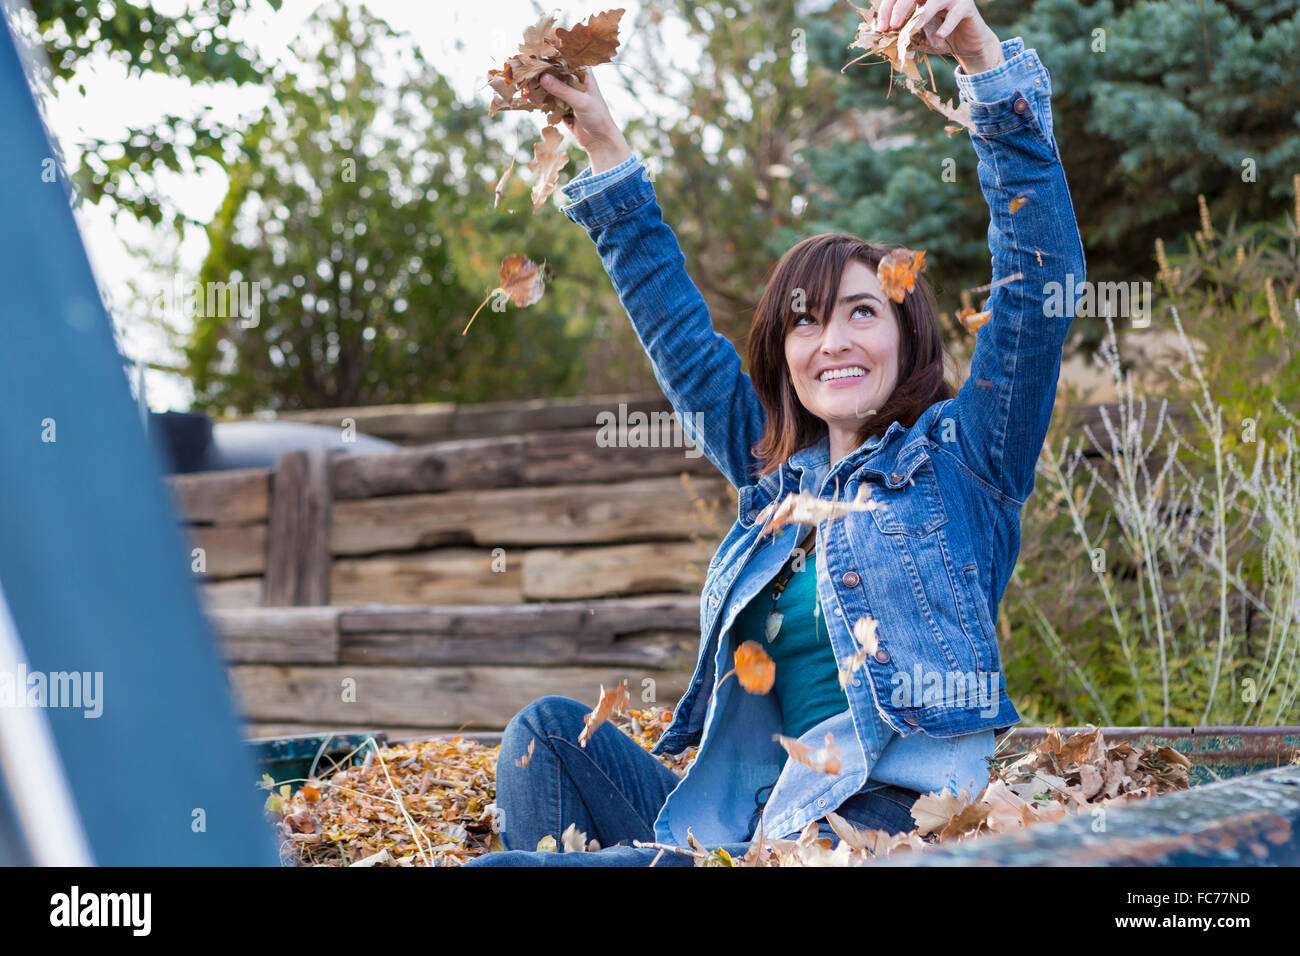 Hispanic woman playing in truck bed Stock Photo